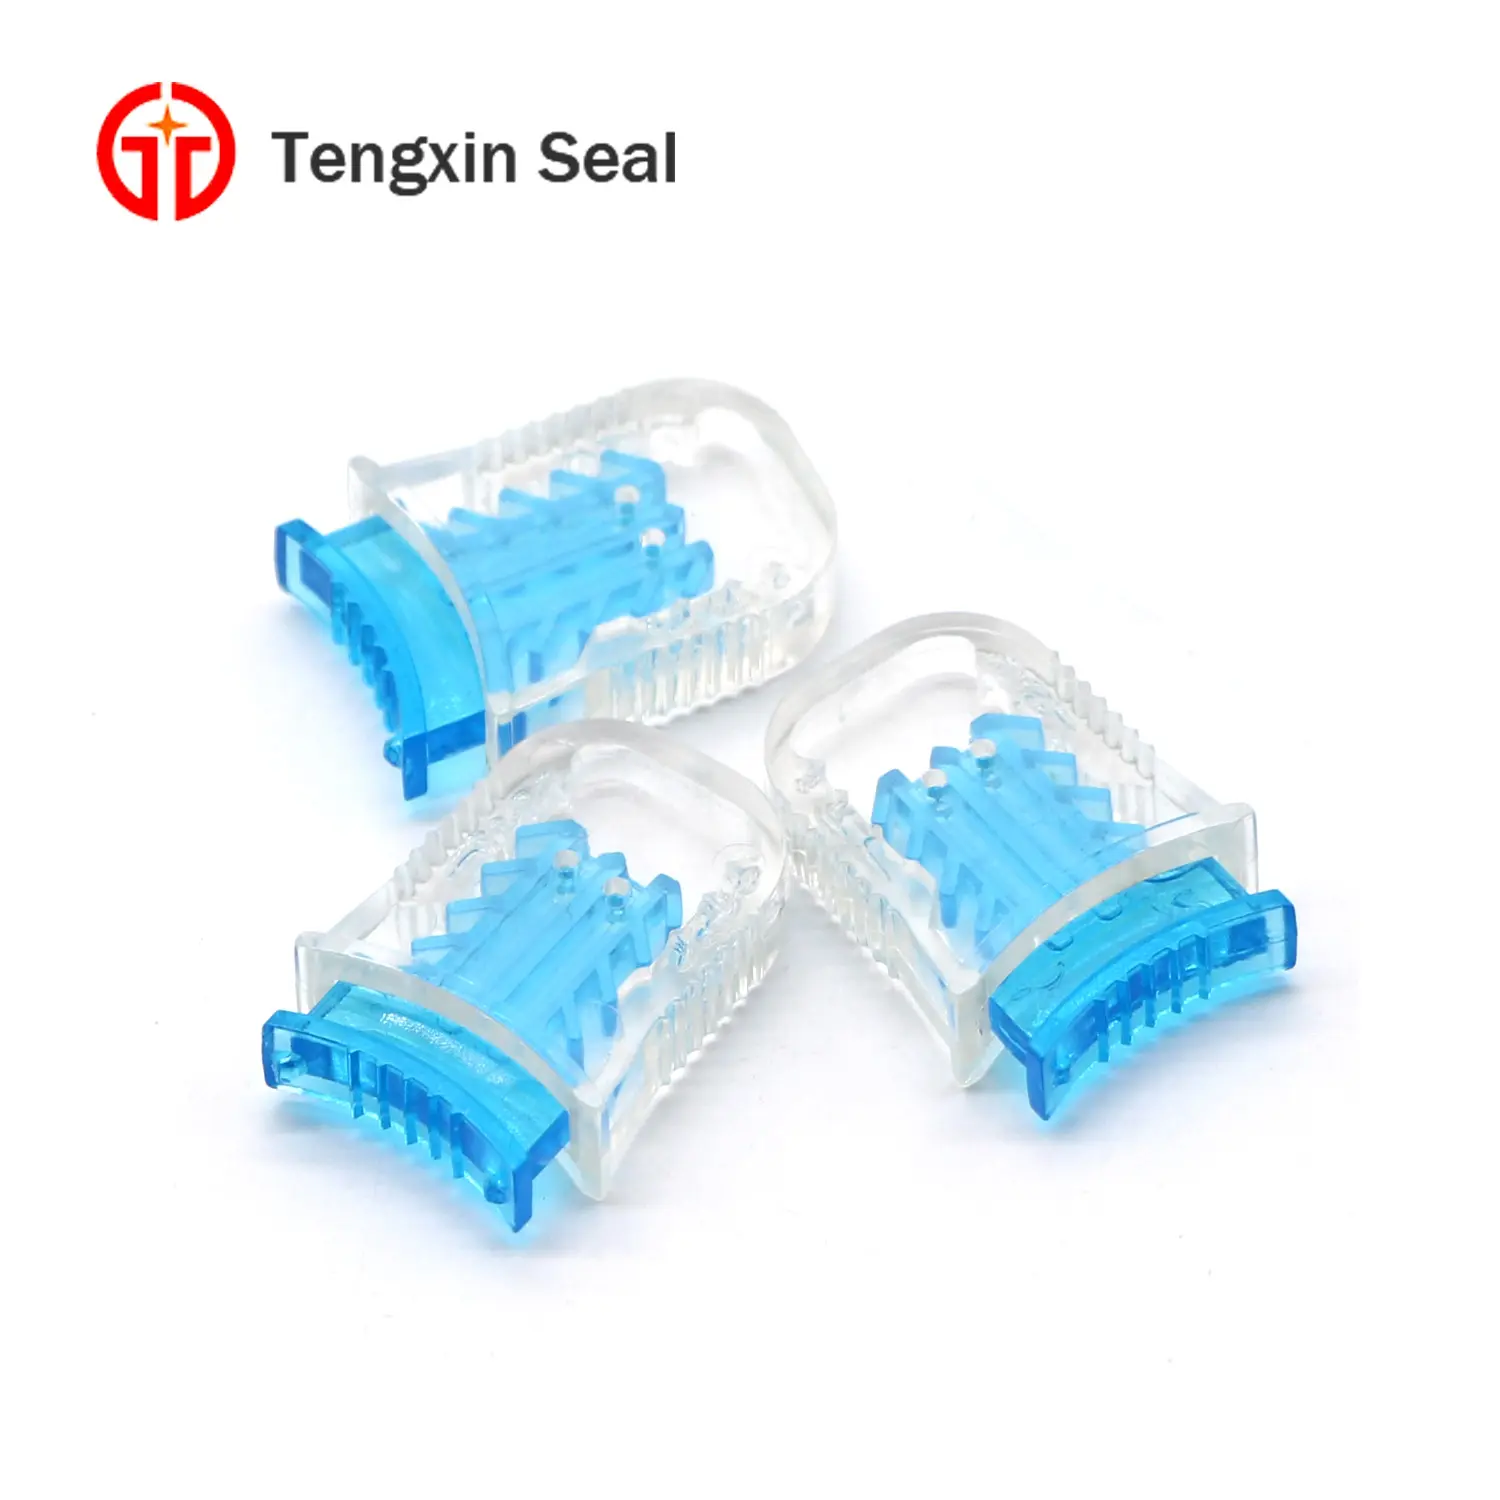 TX-MS105 tin material security seal for water meter with ribbon security seal of square meter seal